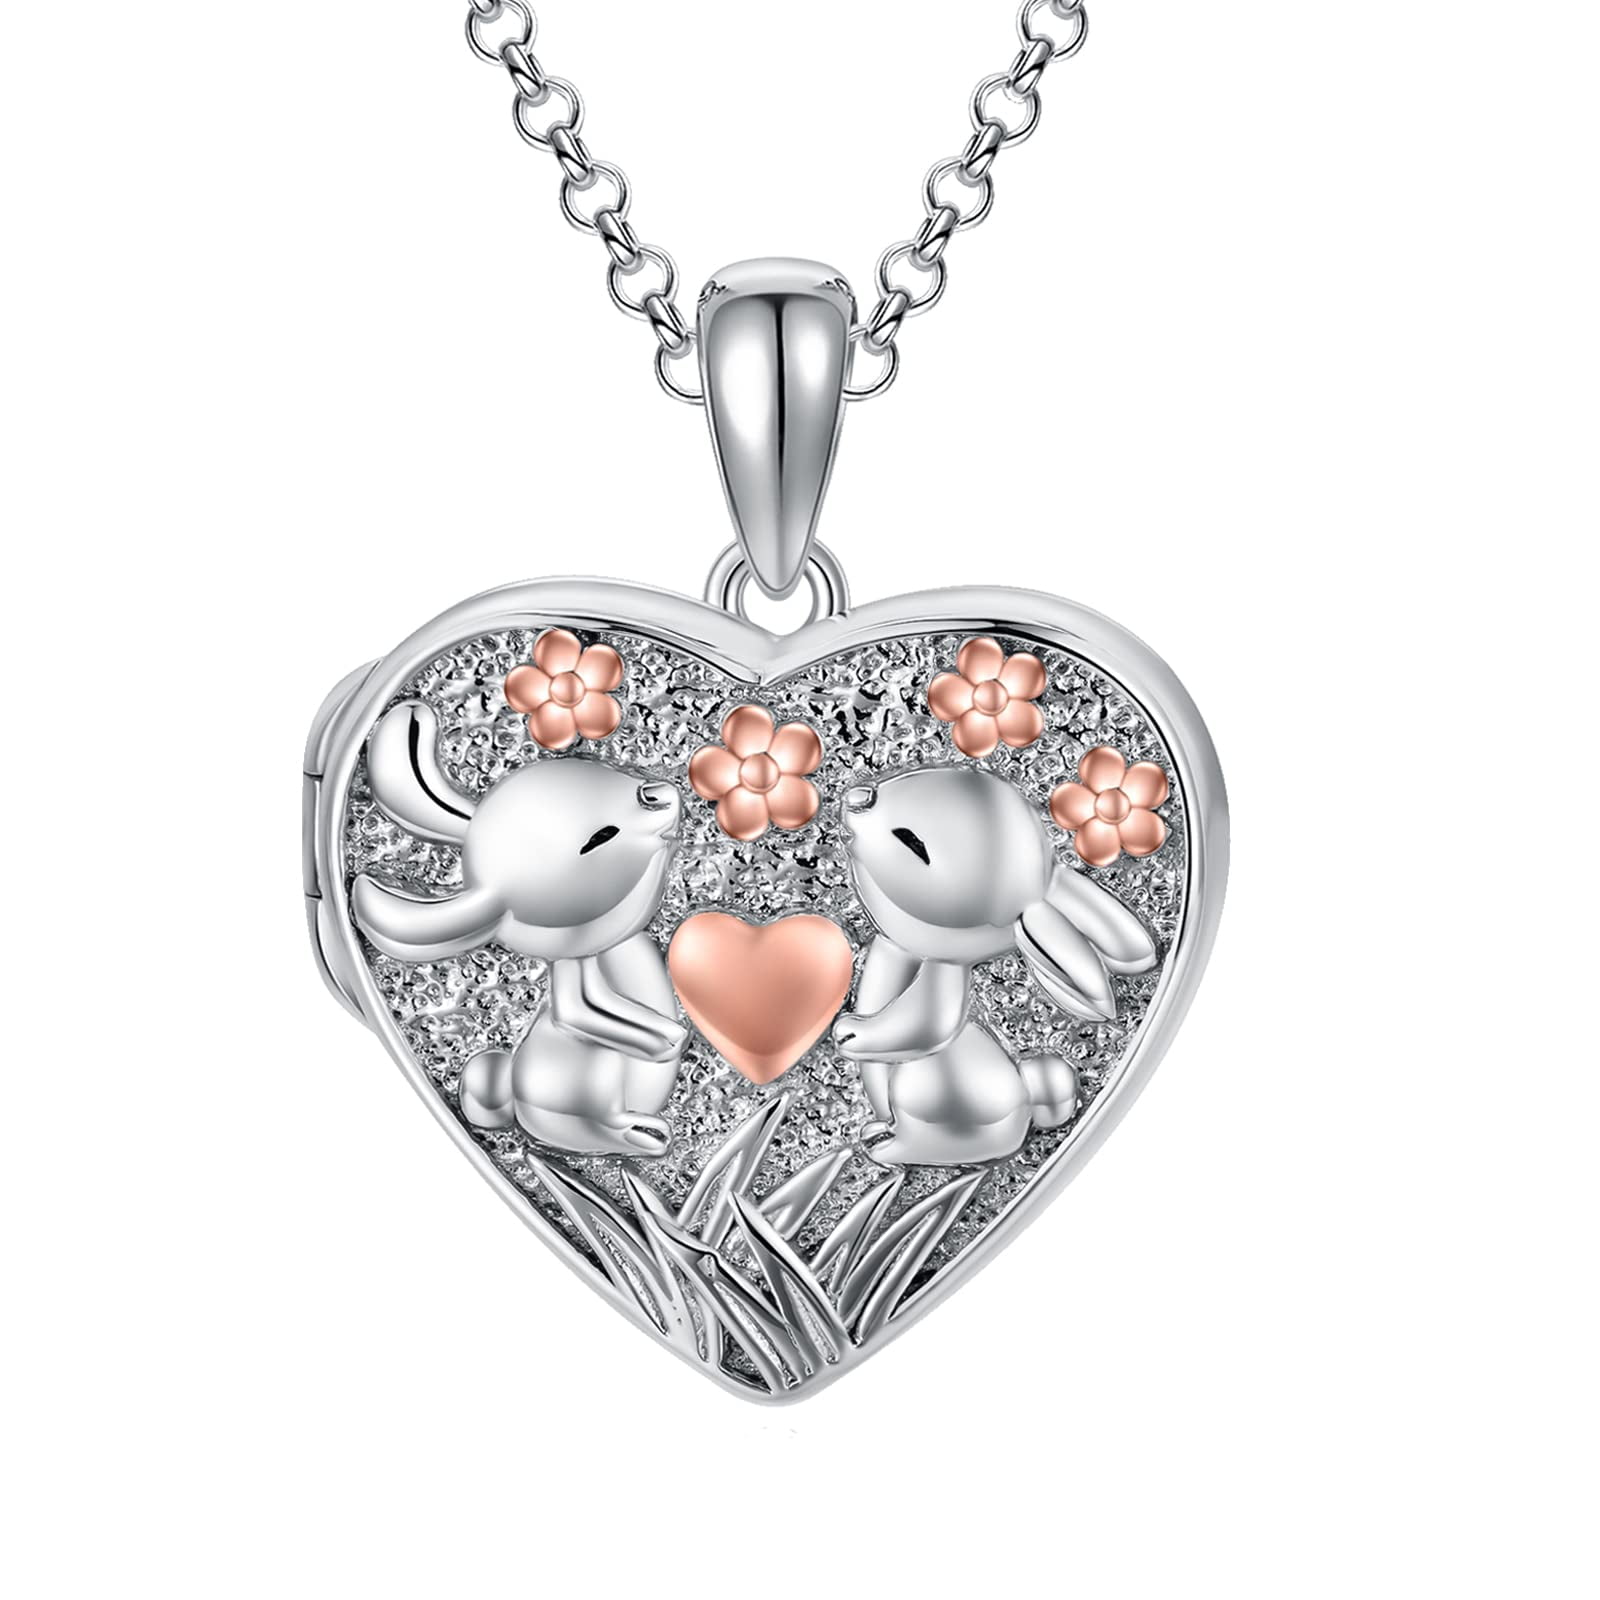 Charm 925 Sterling Silver Locket Necklace Memory of Loves Magic Box Pendant Gift 